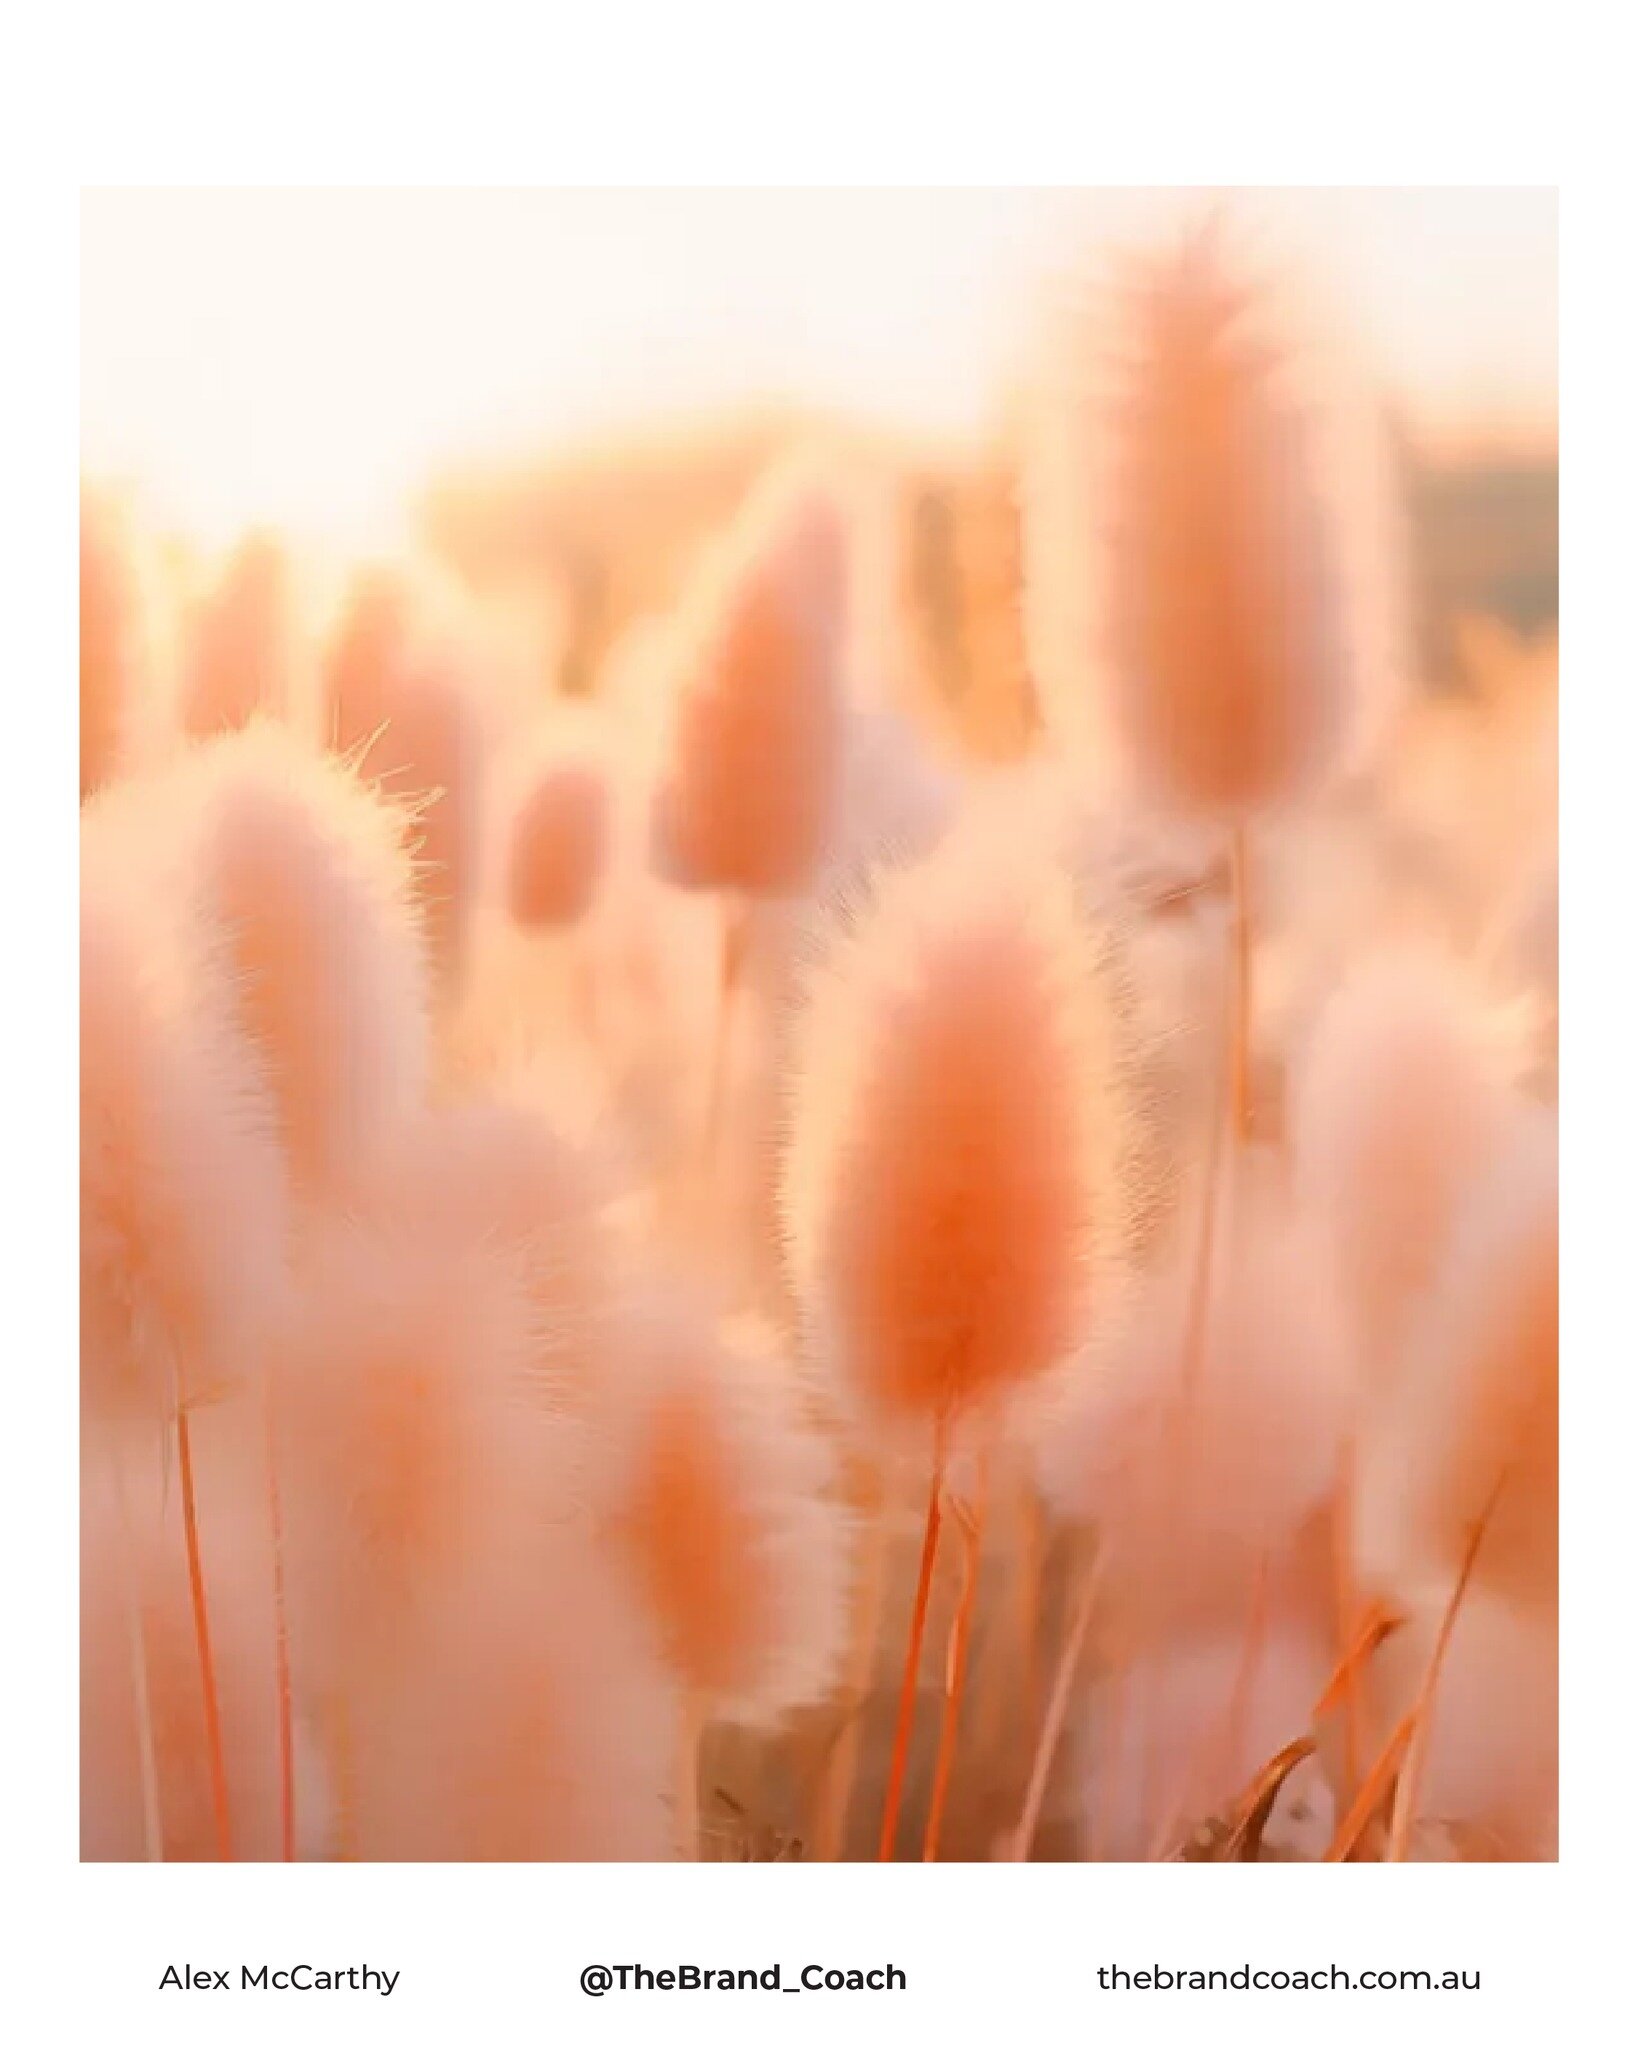 What's the meaning behind Pantone's Colour of the Year, Peach Fuzz? 🍑

&quot;Peach Fuzz is a velvety gentle peach whose all-embracing spirit enriches heart, mind, and body. It is a heartfelt peach hue bringing a feeling of kindness and tenderness, c